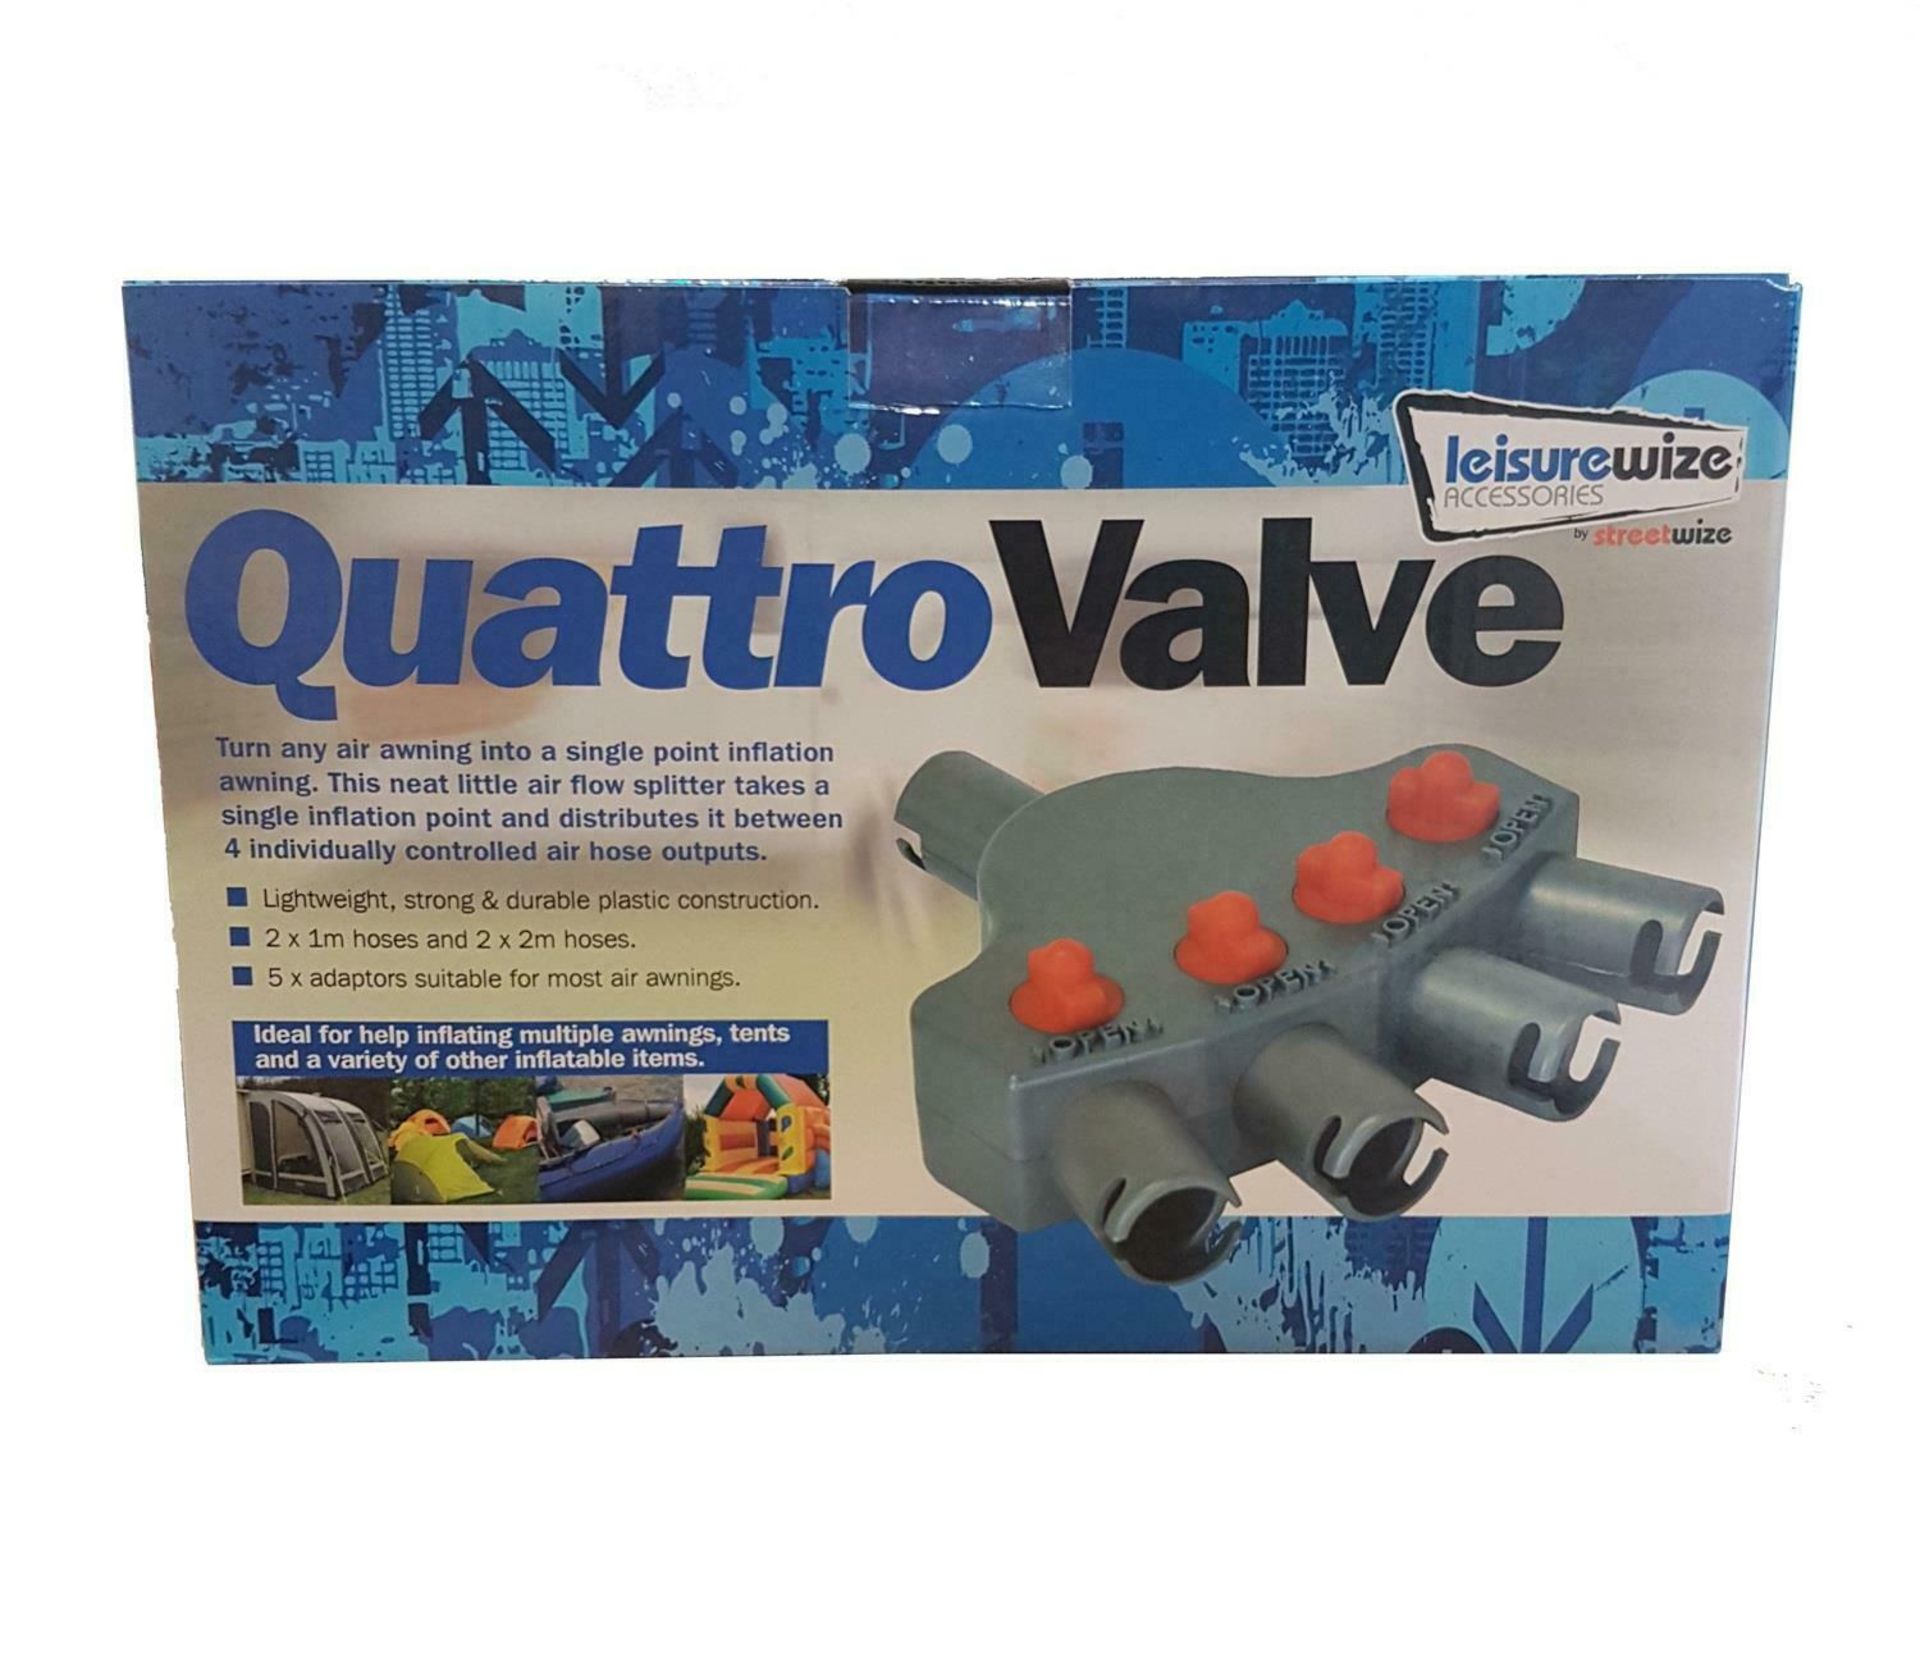 50PCS Brand new LeisureWize Quattro Valve multipump system - inflates multiple items at once - ideal